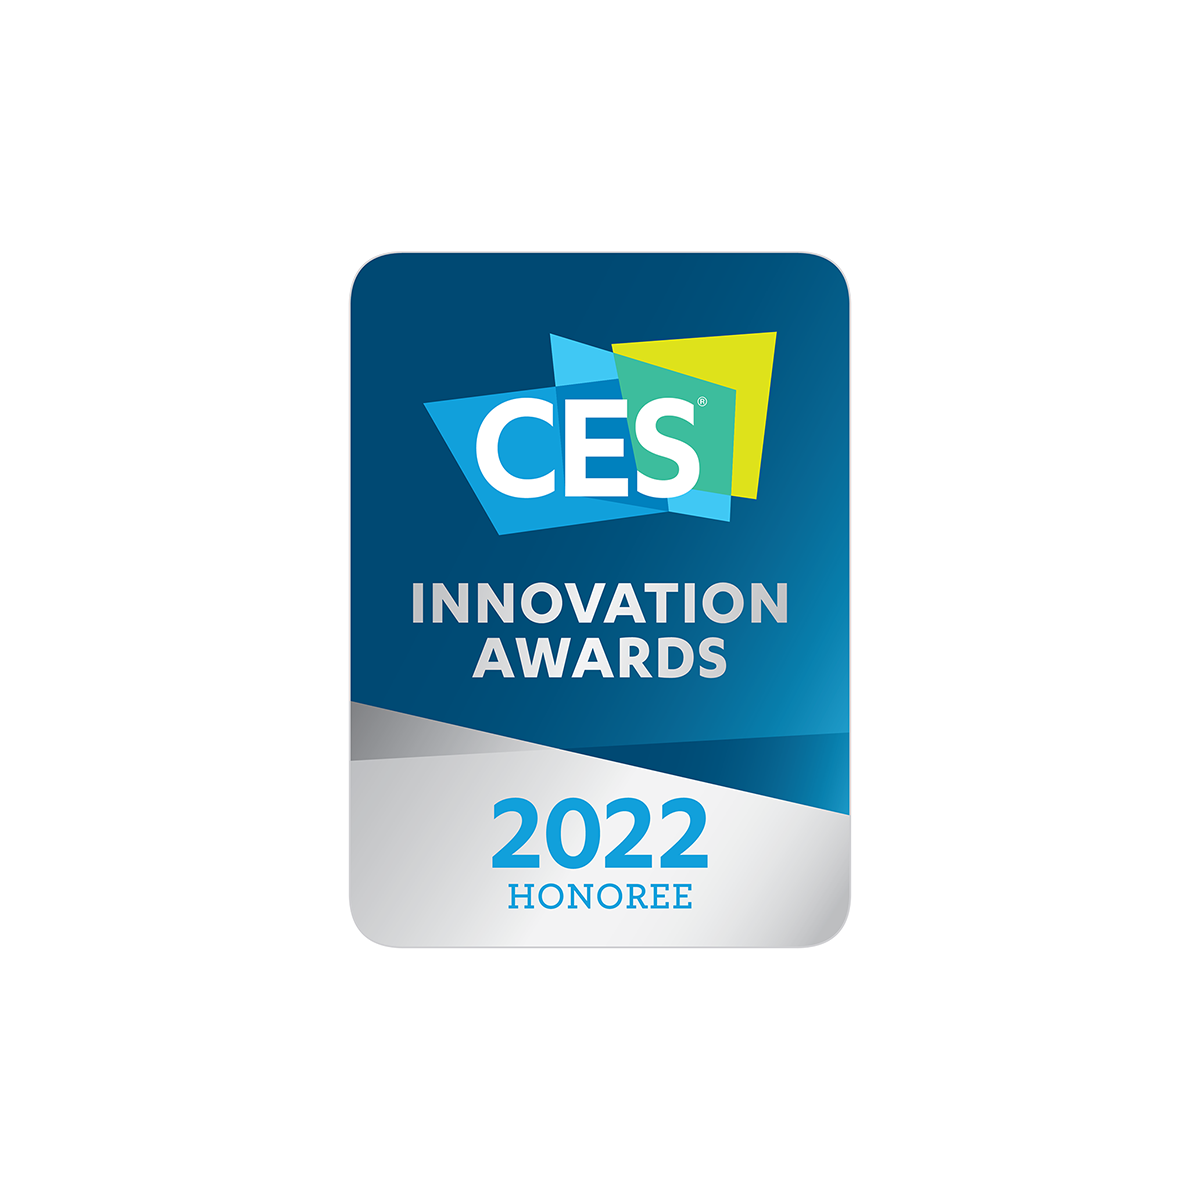 CabinAir named CES® 2022 Innovation Awards Honoree for “Outstanding design and engineering”